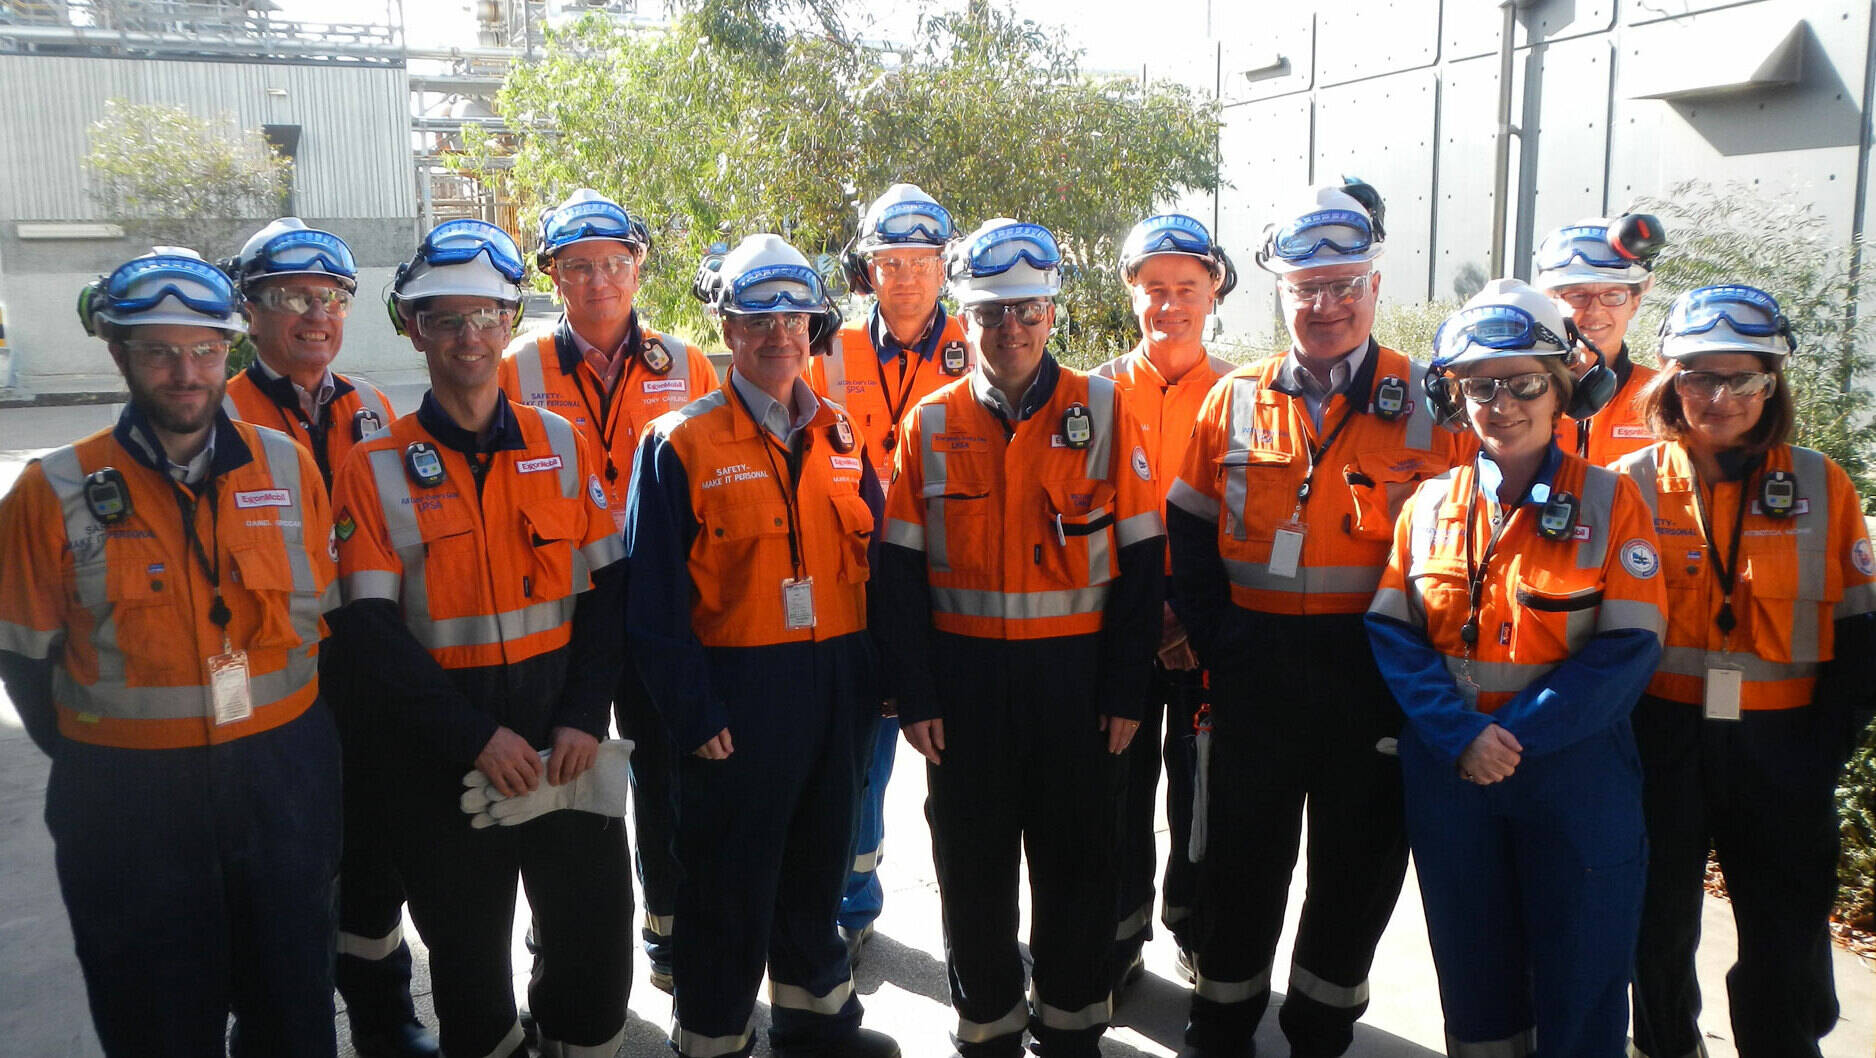 Image Photo— Altona Refinery Manager Riccardo Cavallo said the visit also provided a chance to demonstrate ExxonMobil’s commitment to Altona Refinery and wider supply chain via its ongoing investment.